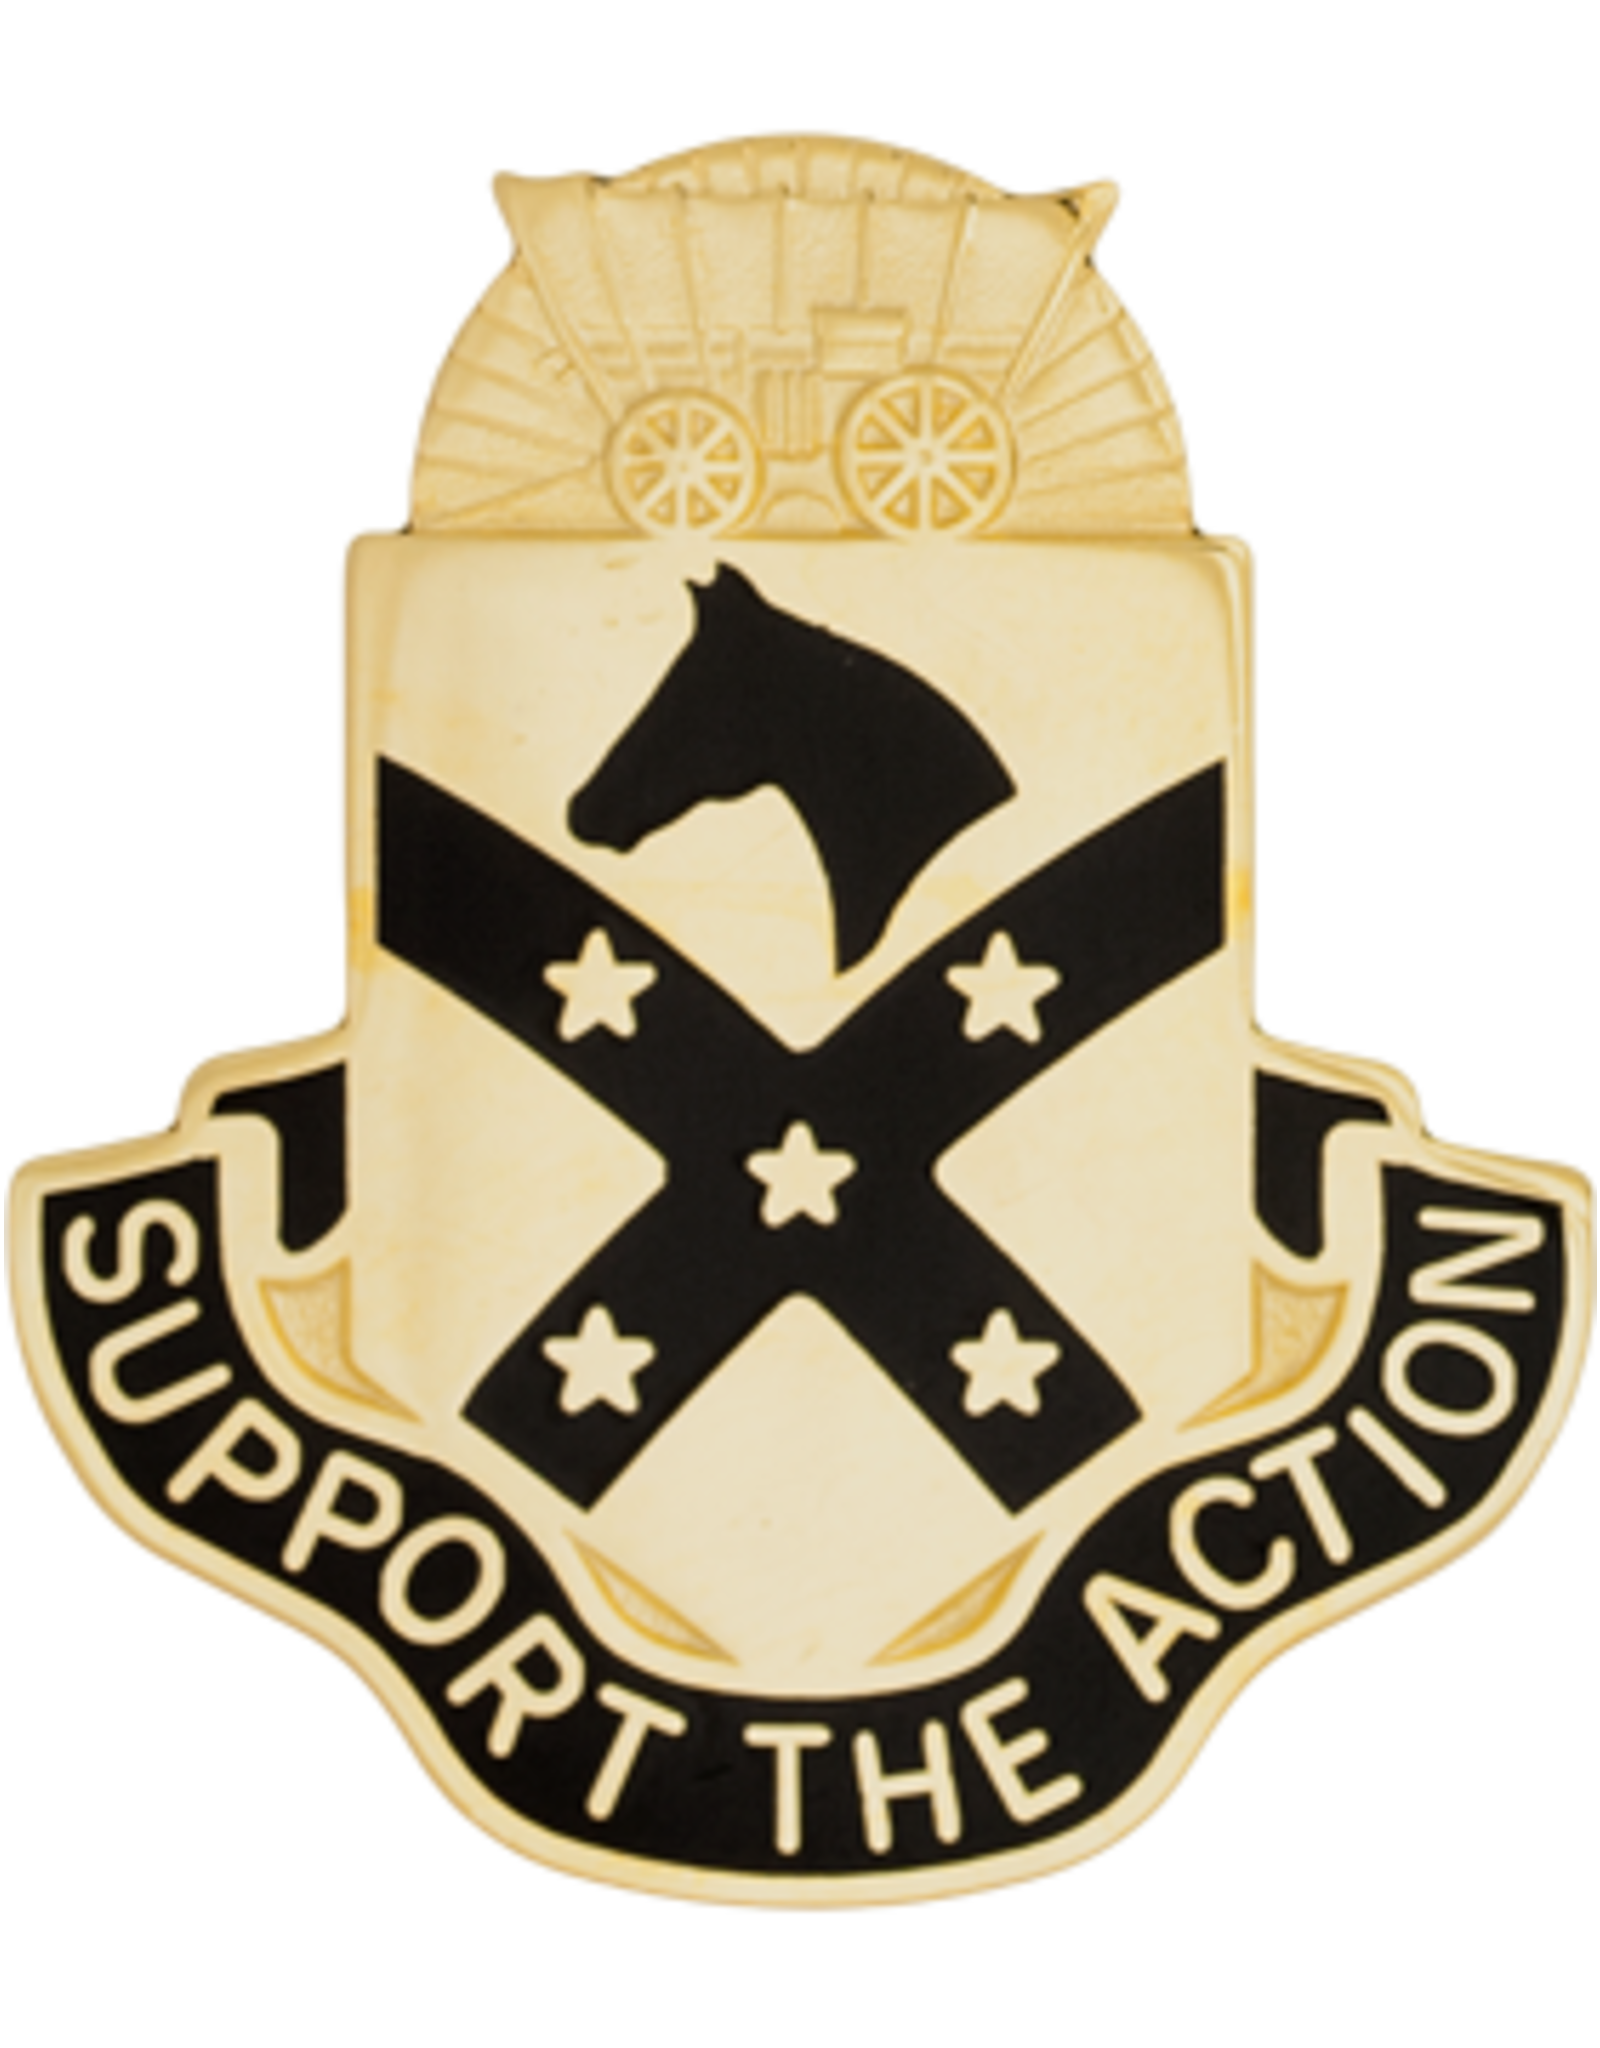 15th Sustainment Crest, "Support the Action"